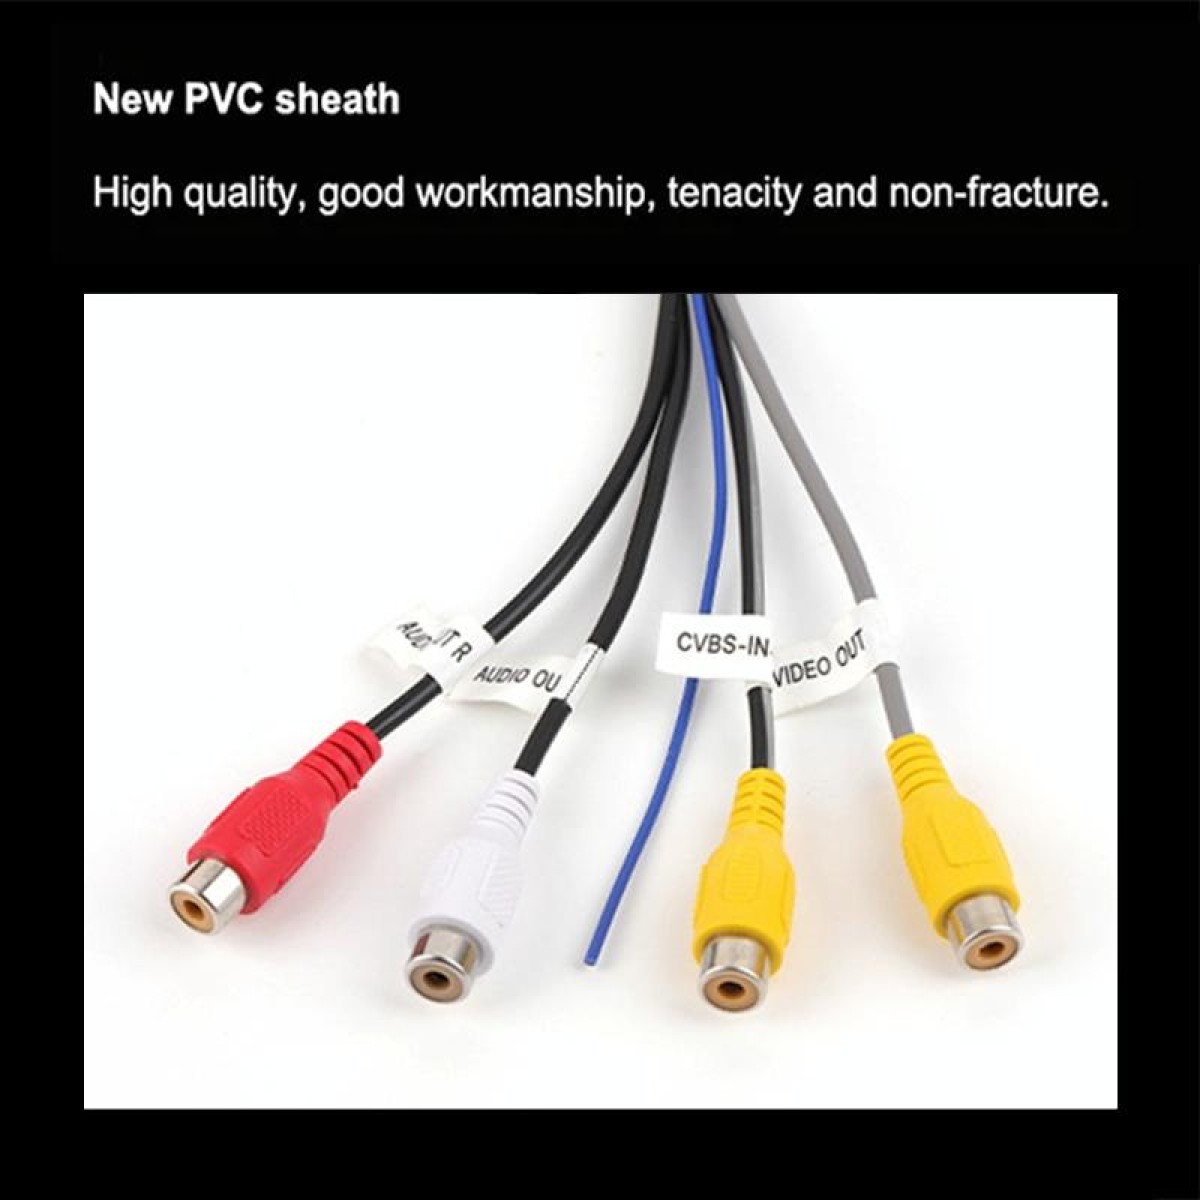 Palminfo Male Android Navigation 20-pin Plug RCA Video Audio Cable